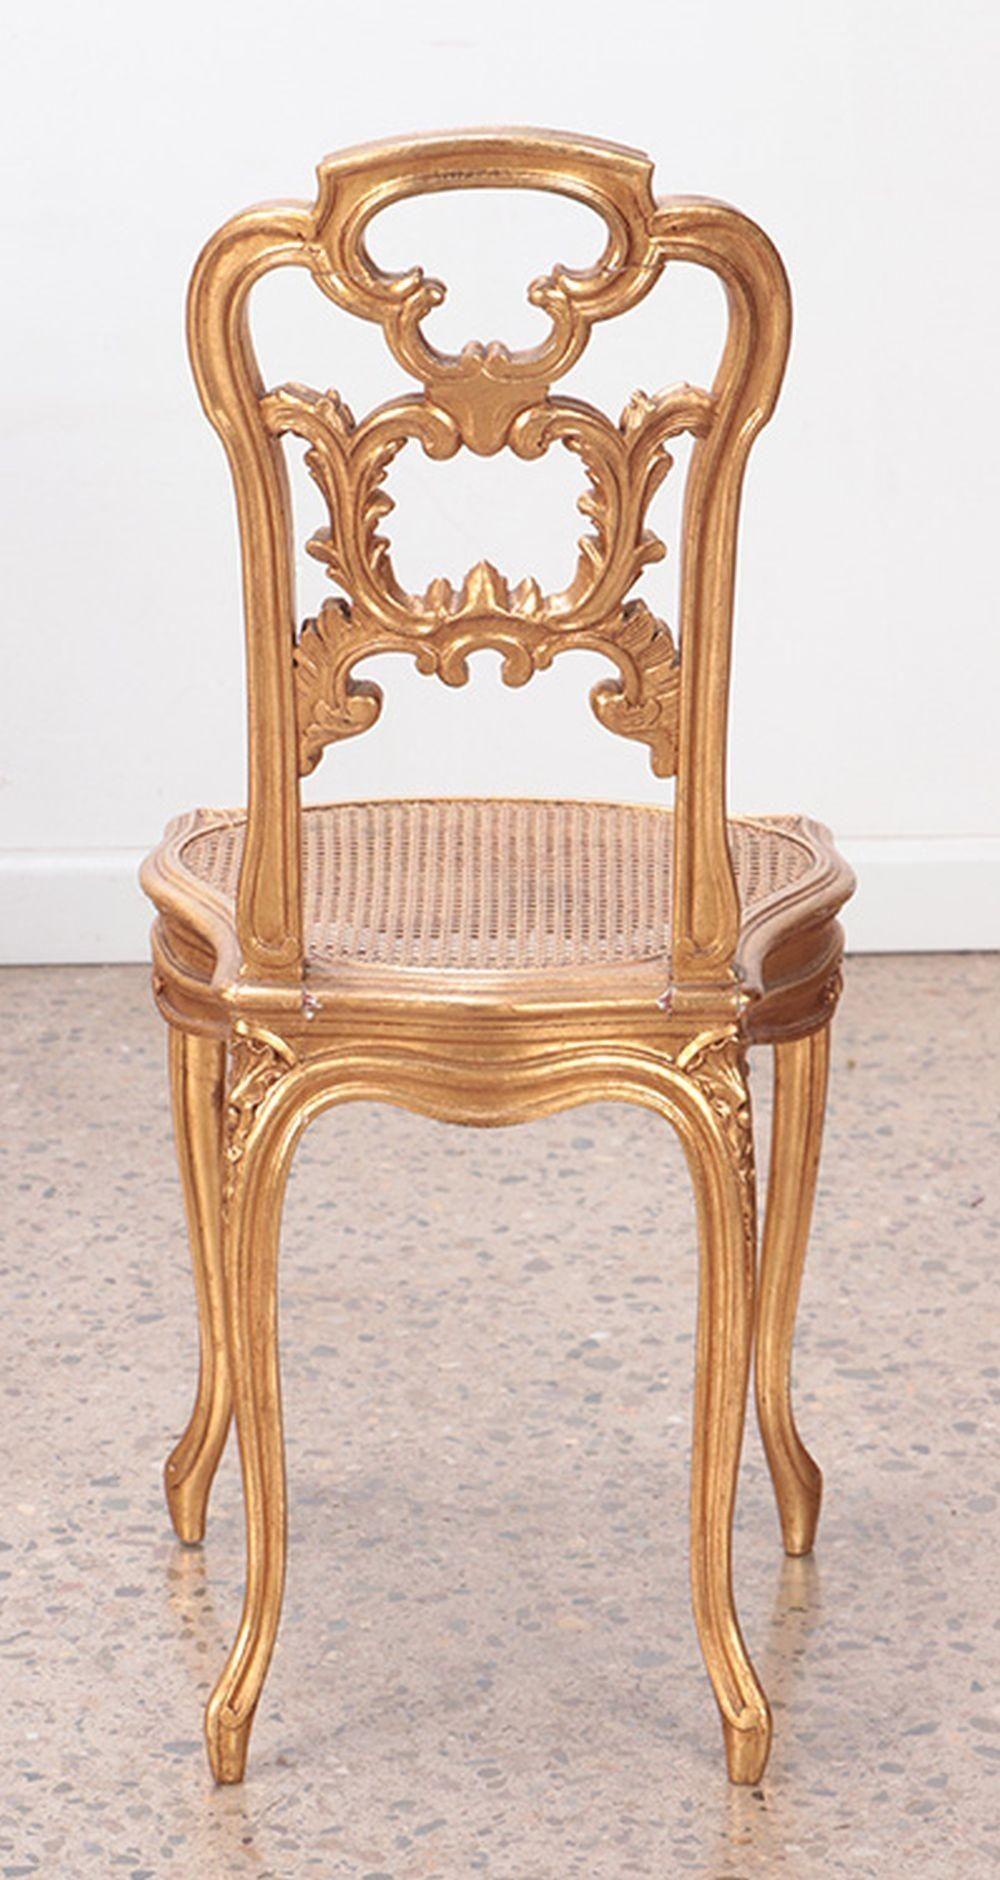 Early 20th Century French Pair of Carved Giltwood Side Chairs, c. 1910's For Sale